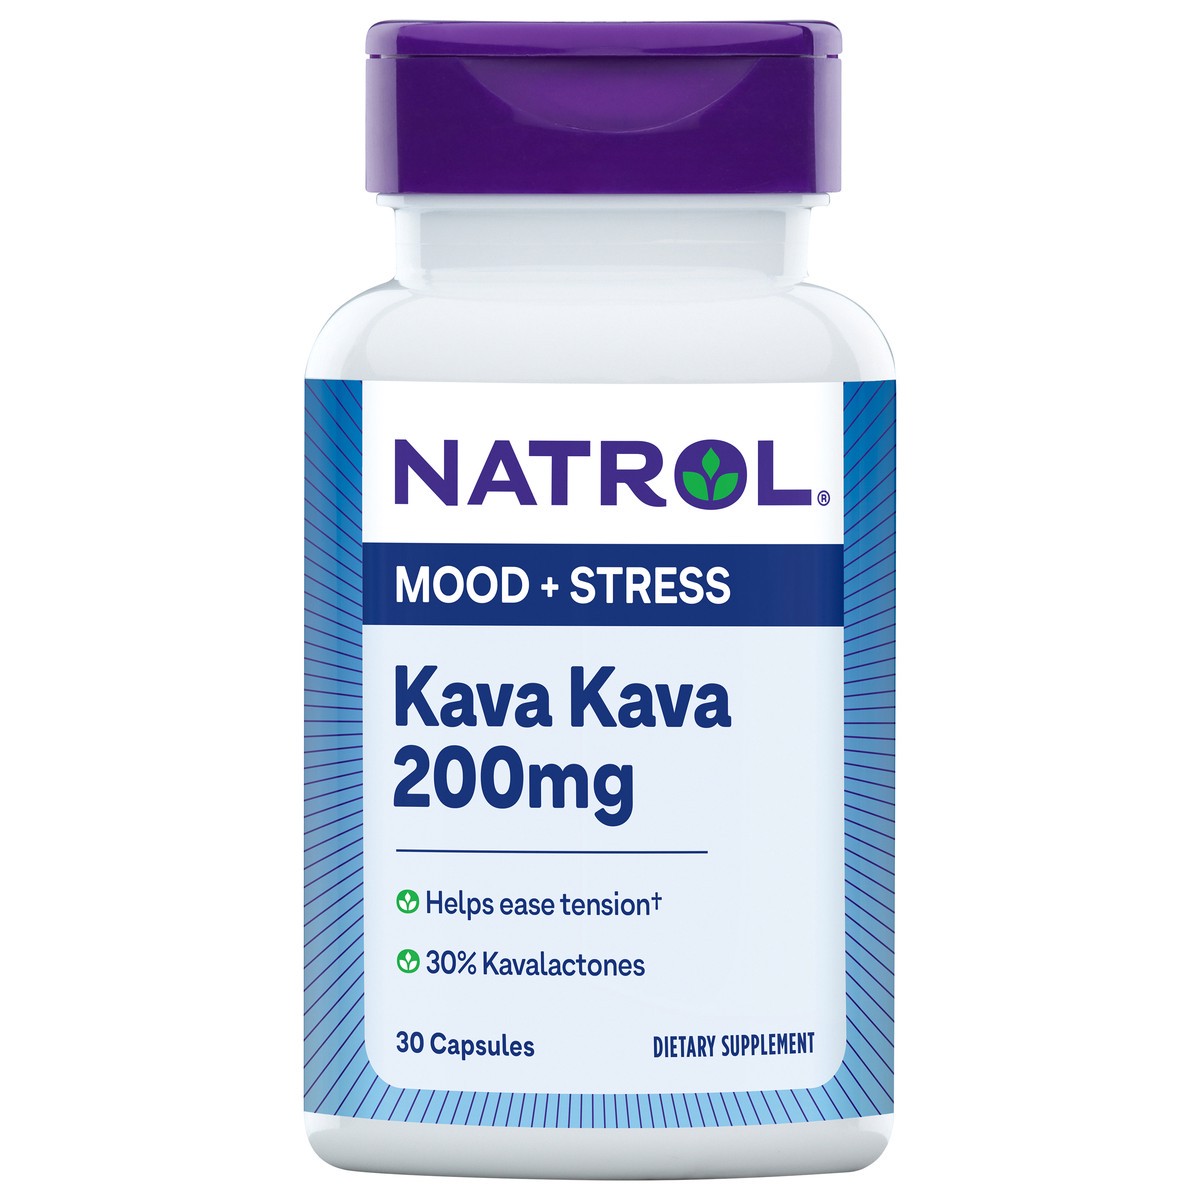 slide 3 of 8, Natrol Mood & Stress Kava Kava 200mg, Dietary Supplement for Relaxation and Eases Tension, 30 Capsules, 15-30 Day Supply, 30 ct